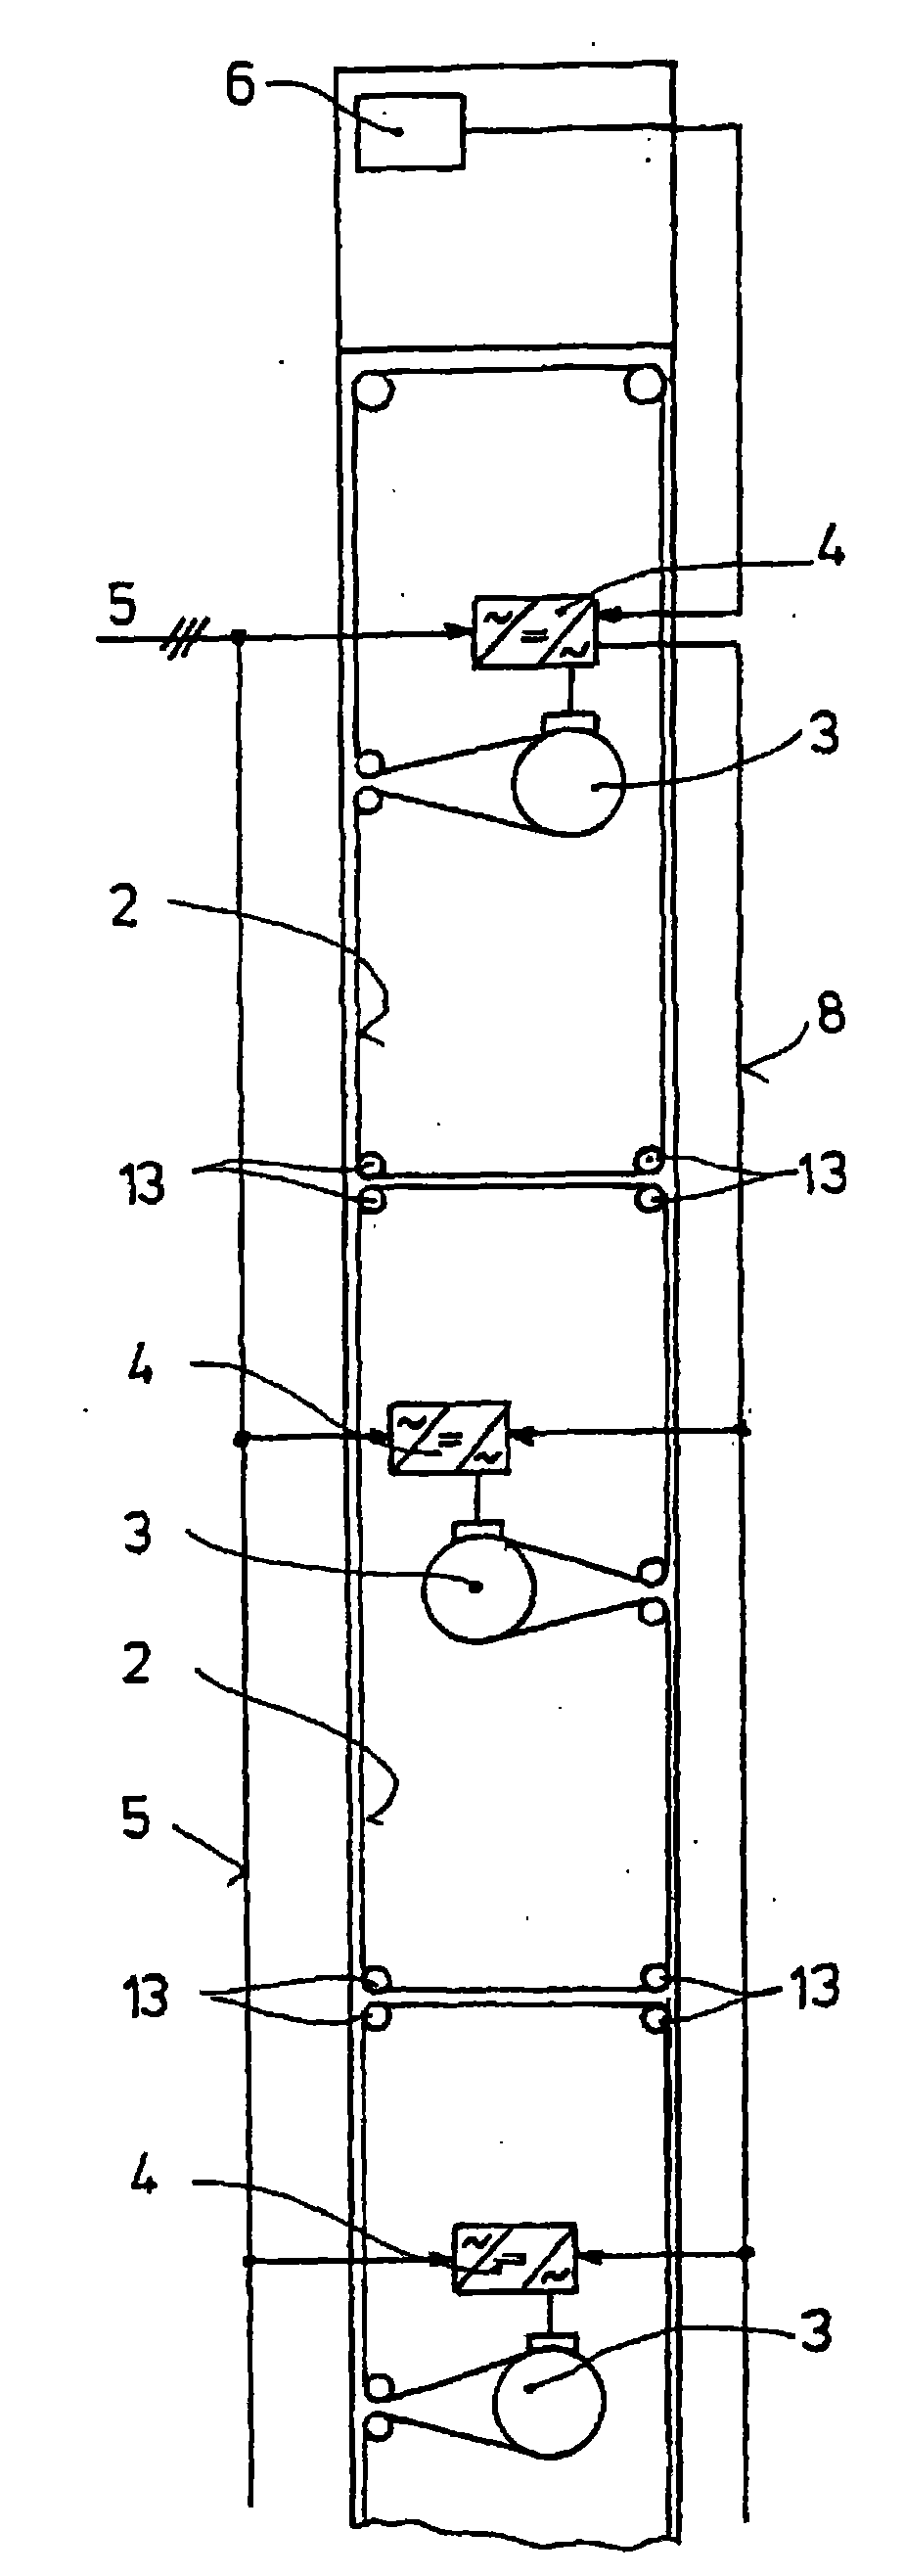 Drive device for the spindles of a ring spinning machine